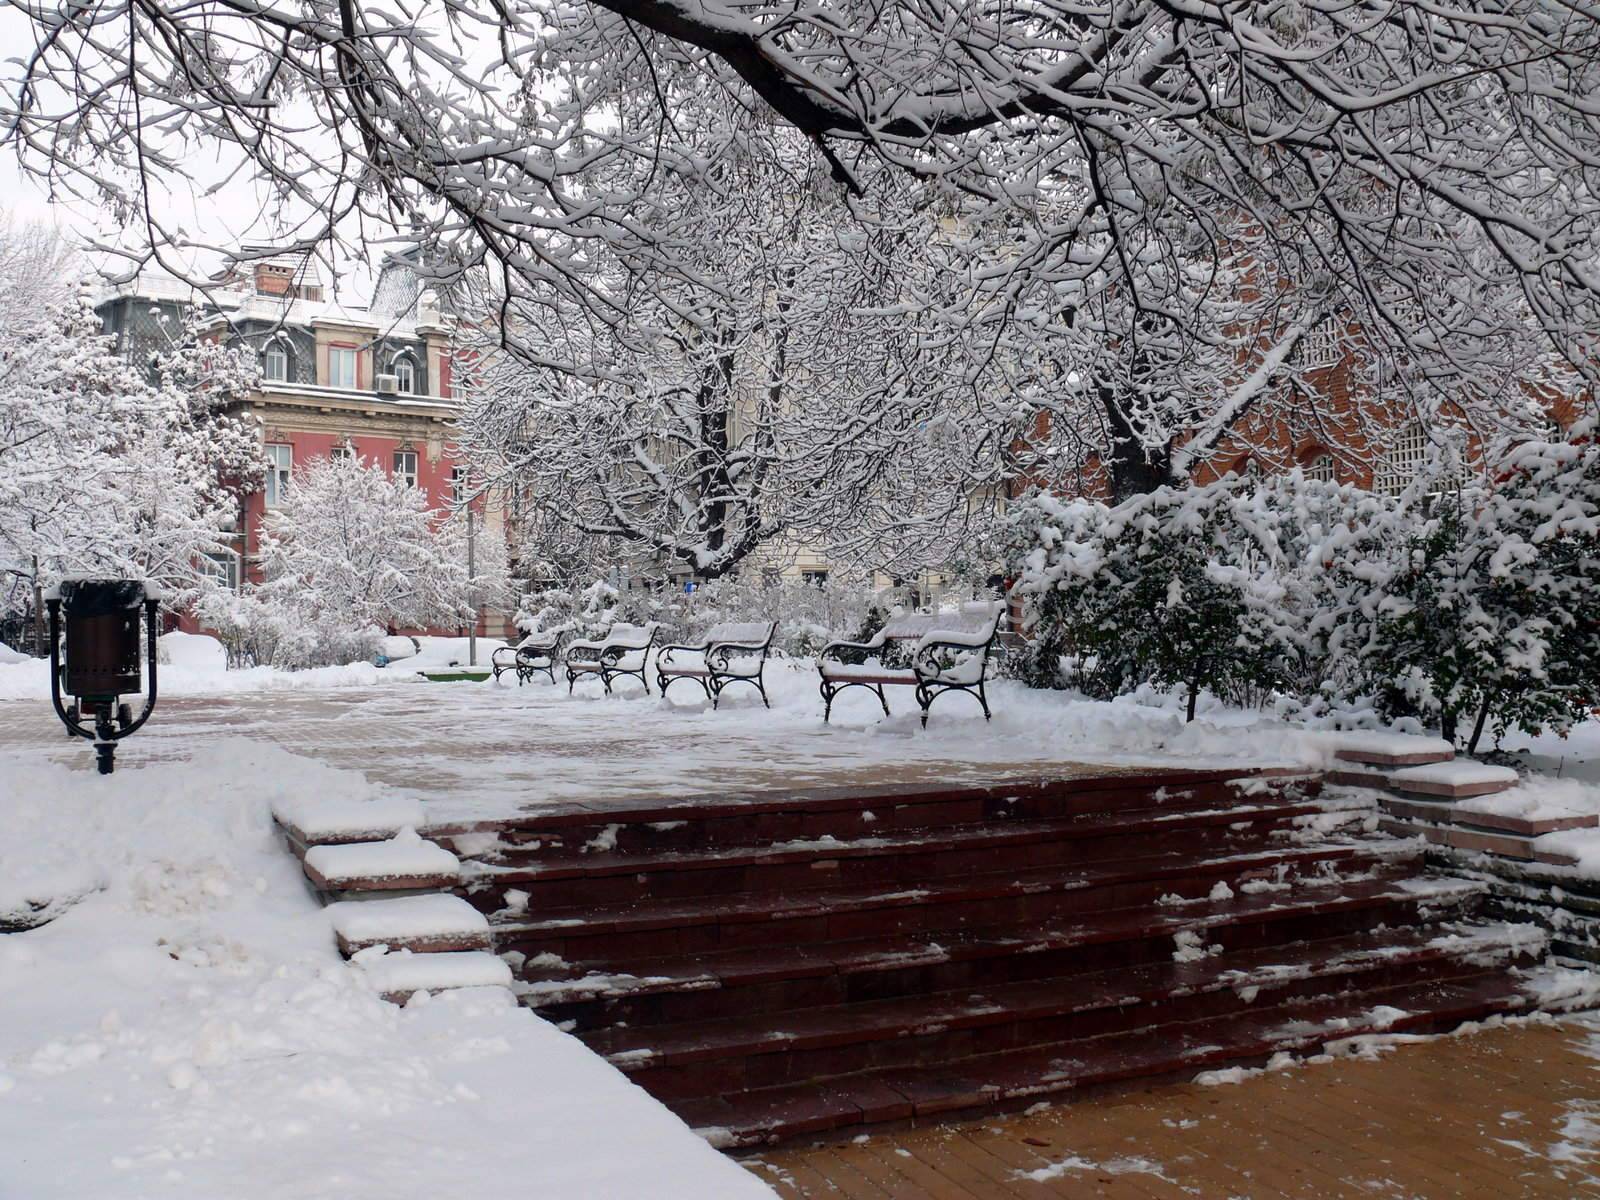 Benches with snow in Sofia, Bulgaria by Stoyanov